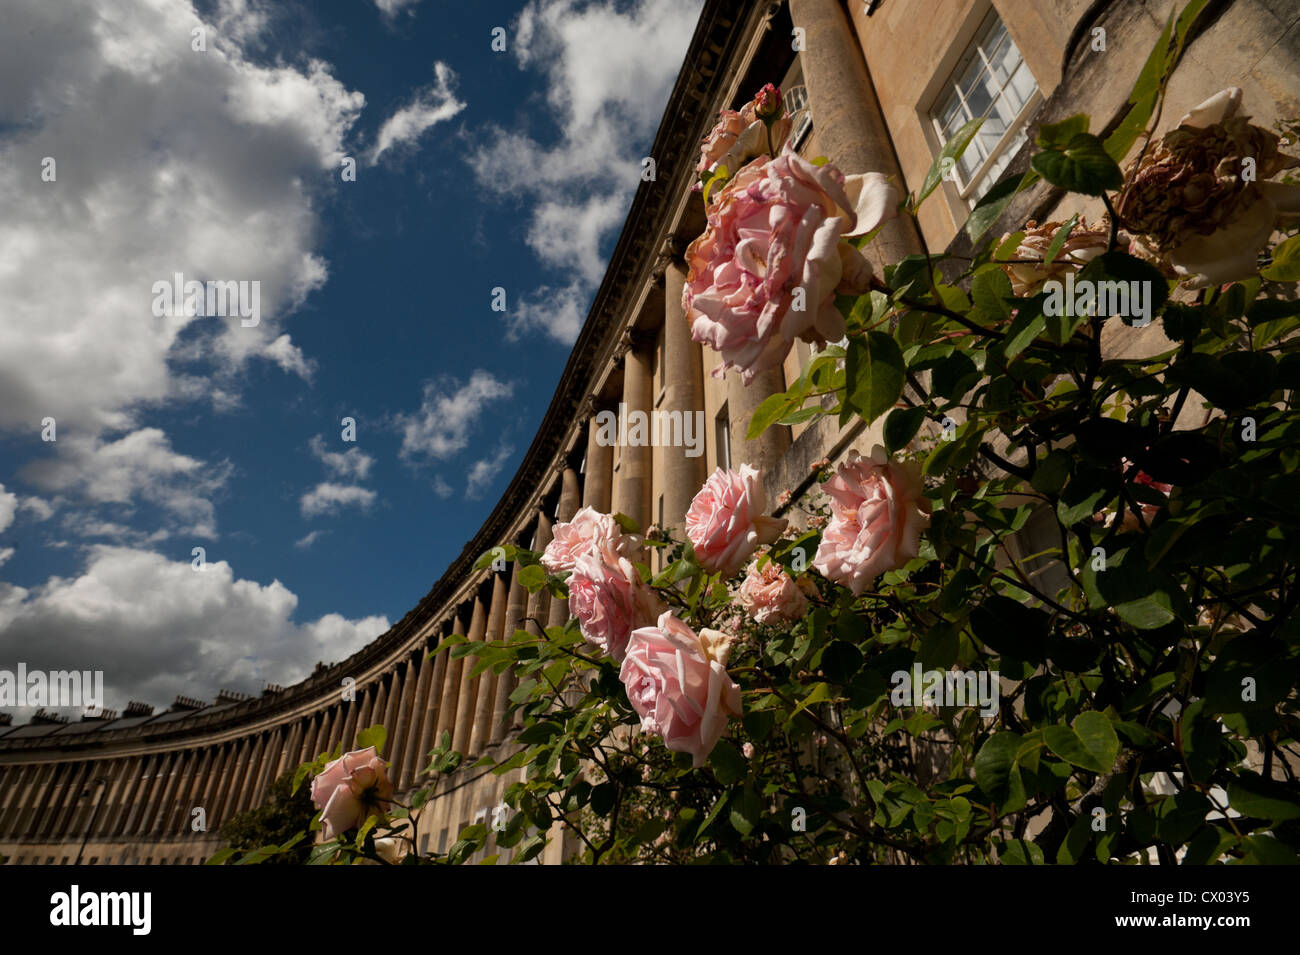 Wide angle view of the Royal Crescent, Bath, England, with pink roses in the foreground. Stock Photo